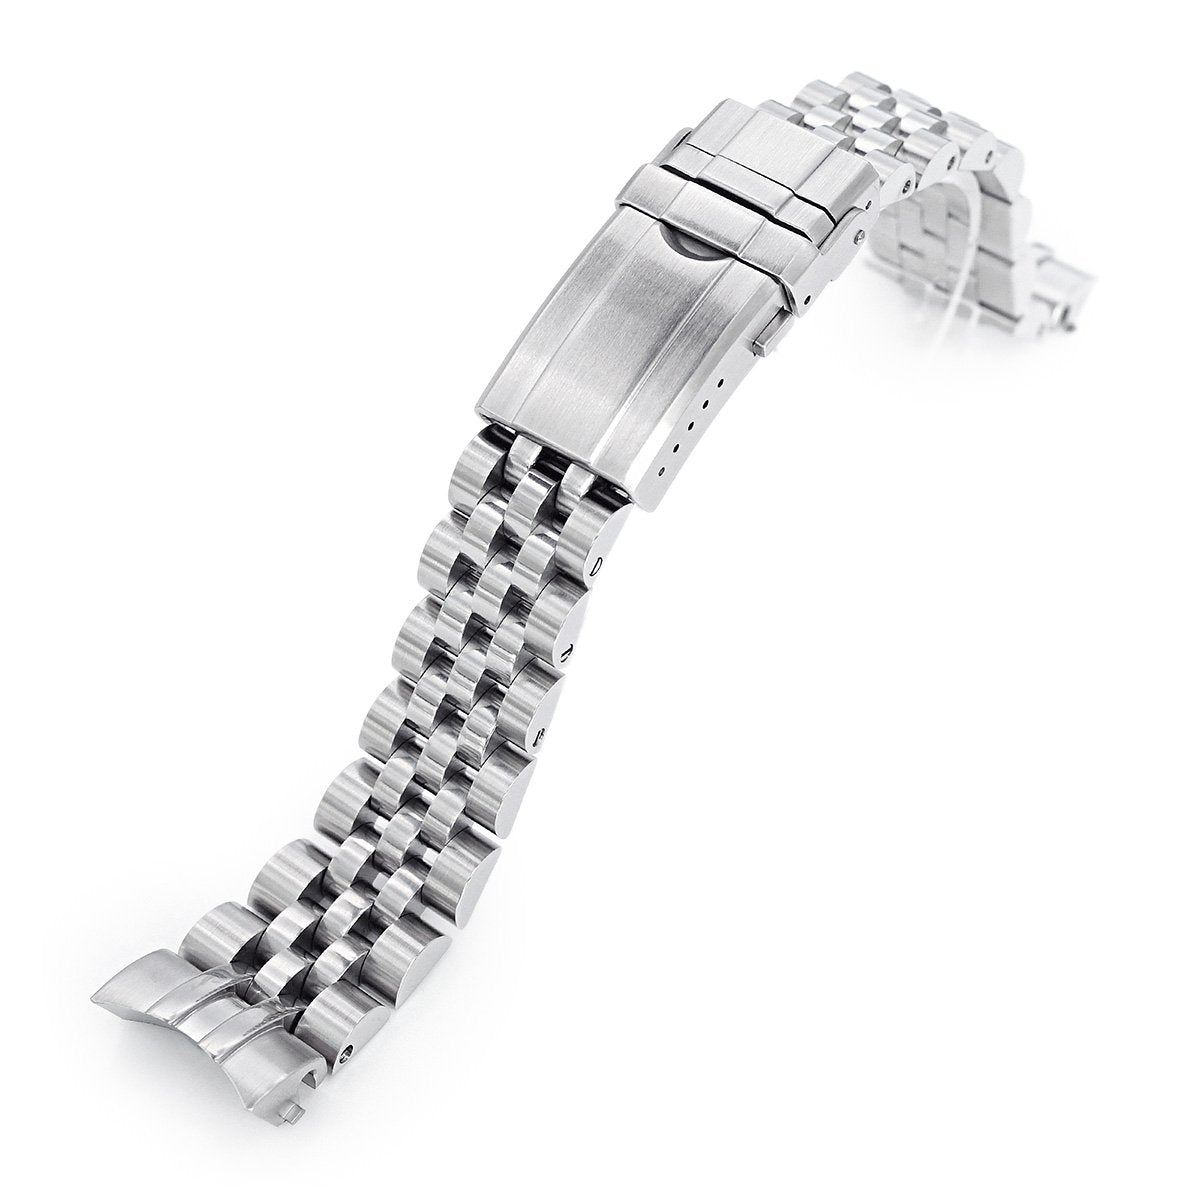 Beyond the Vintage Angus Louis Watch Bracelet for TUD Tiger 79280 in Brushed Turning Clasp Strapcode Watch Bands